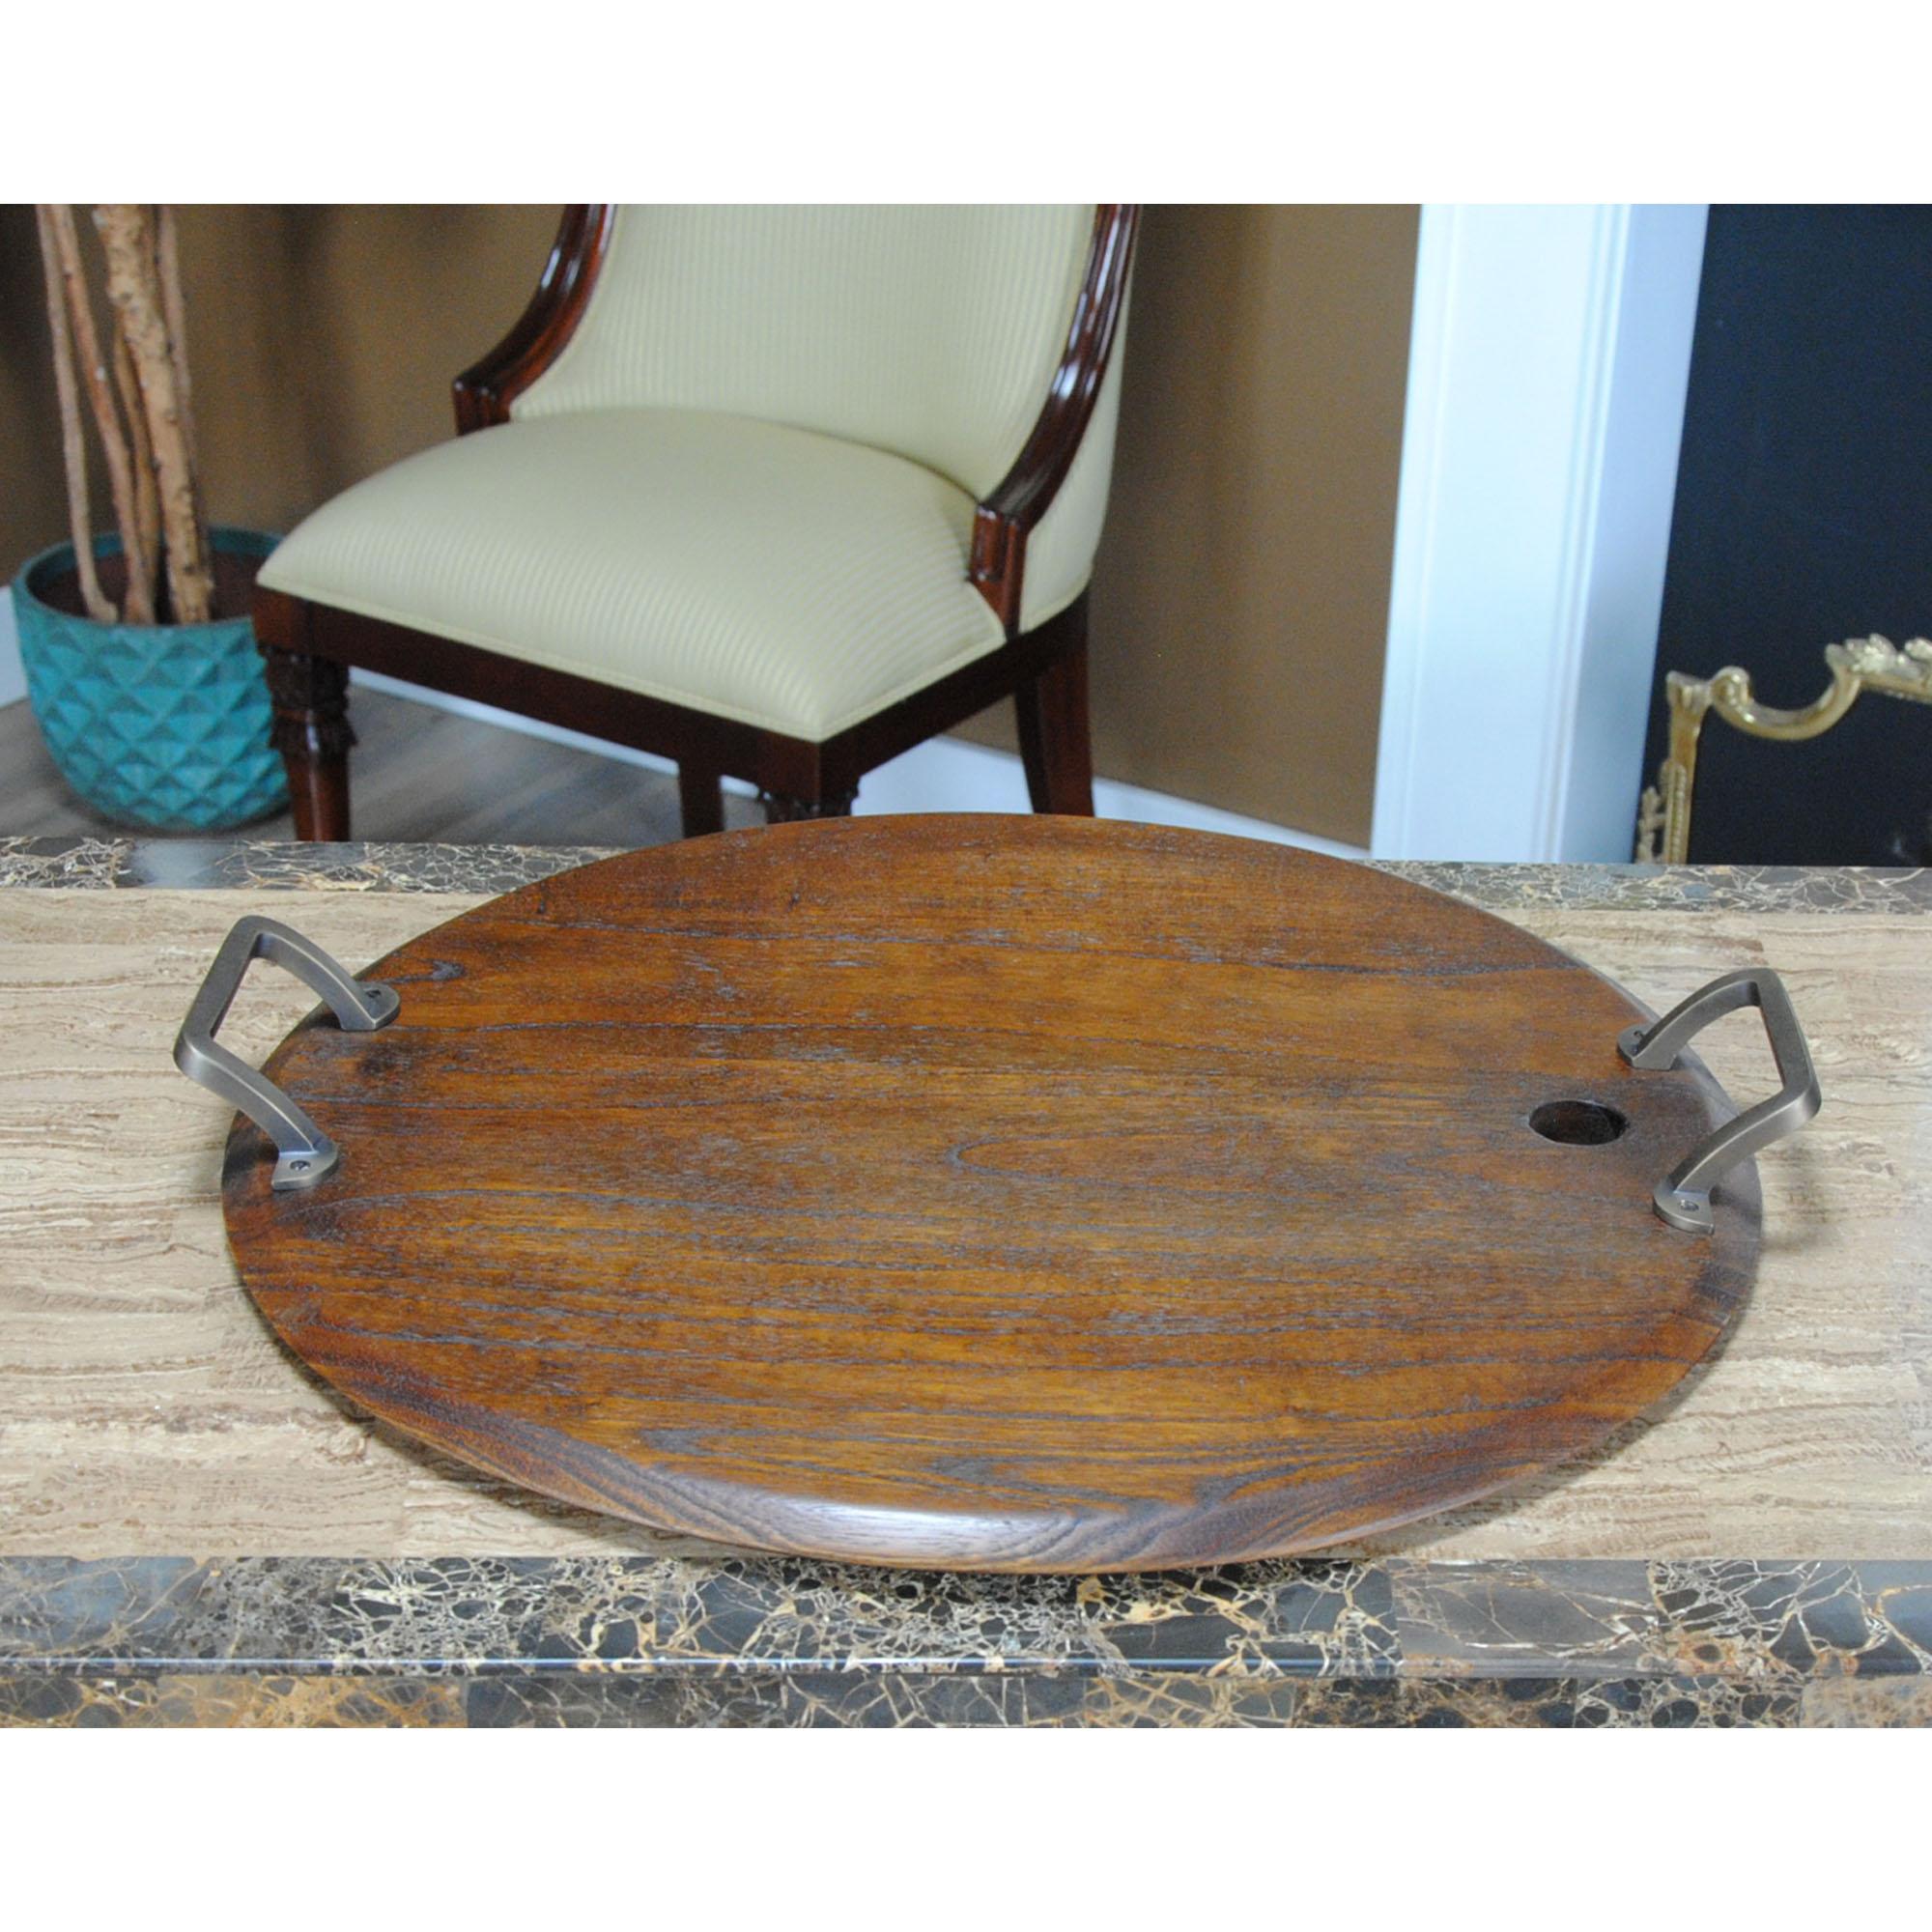 From Niagara Furniture, this Large Oak Wine Barrel Tray is produced from solid oak and created to resemble the end of a wine barrel.  Using a wooden cutting / serving board provides a very resilient surface while protecting knives from damage.  This